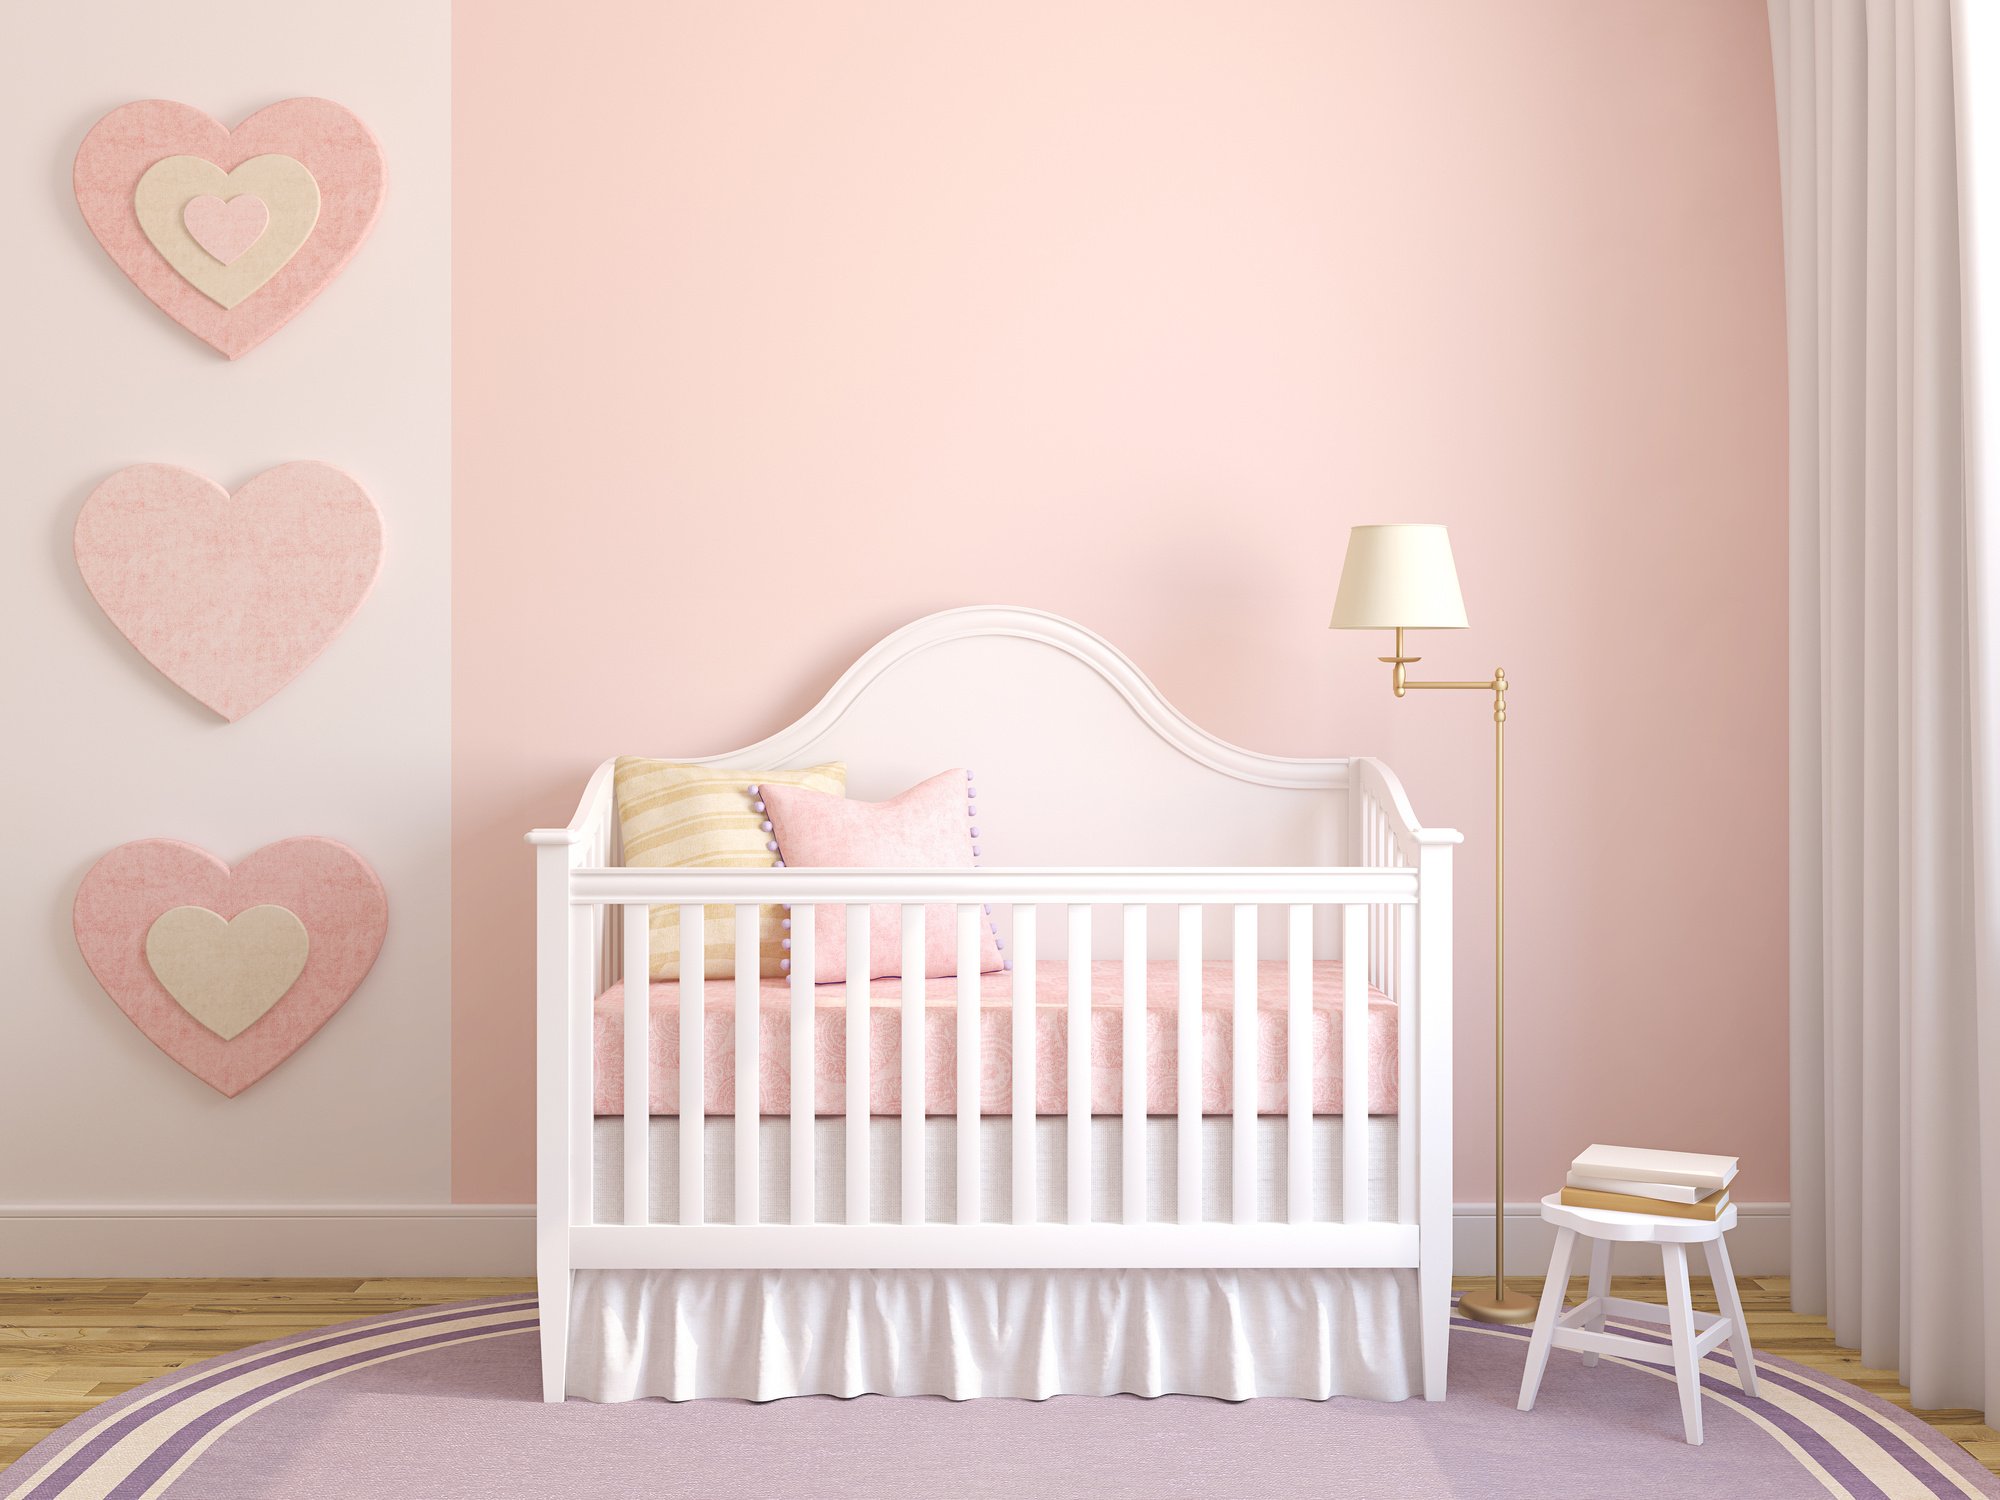 Your baby's nursery should be comfortable and vibrant. Click here for help with painting inspiration and ideas for your baby's room.